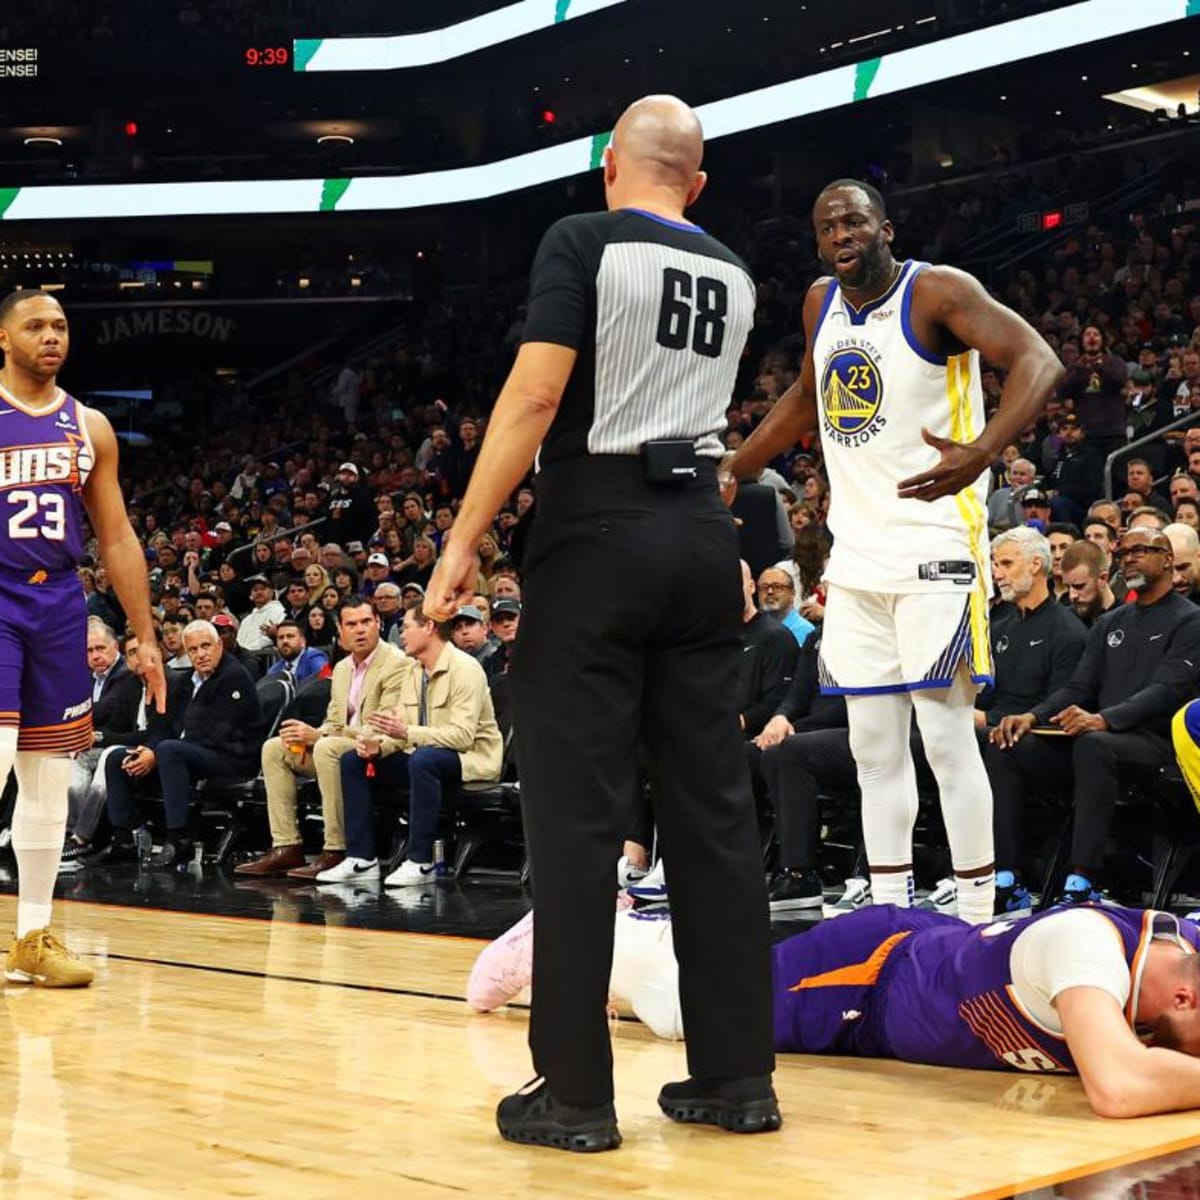 Draymond Green suspended indefinitely from NBA after striking Suns player